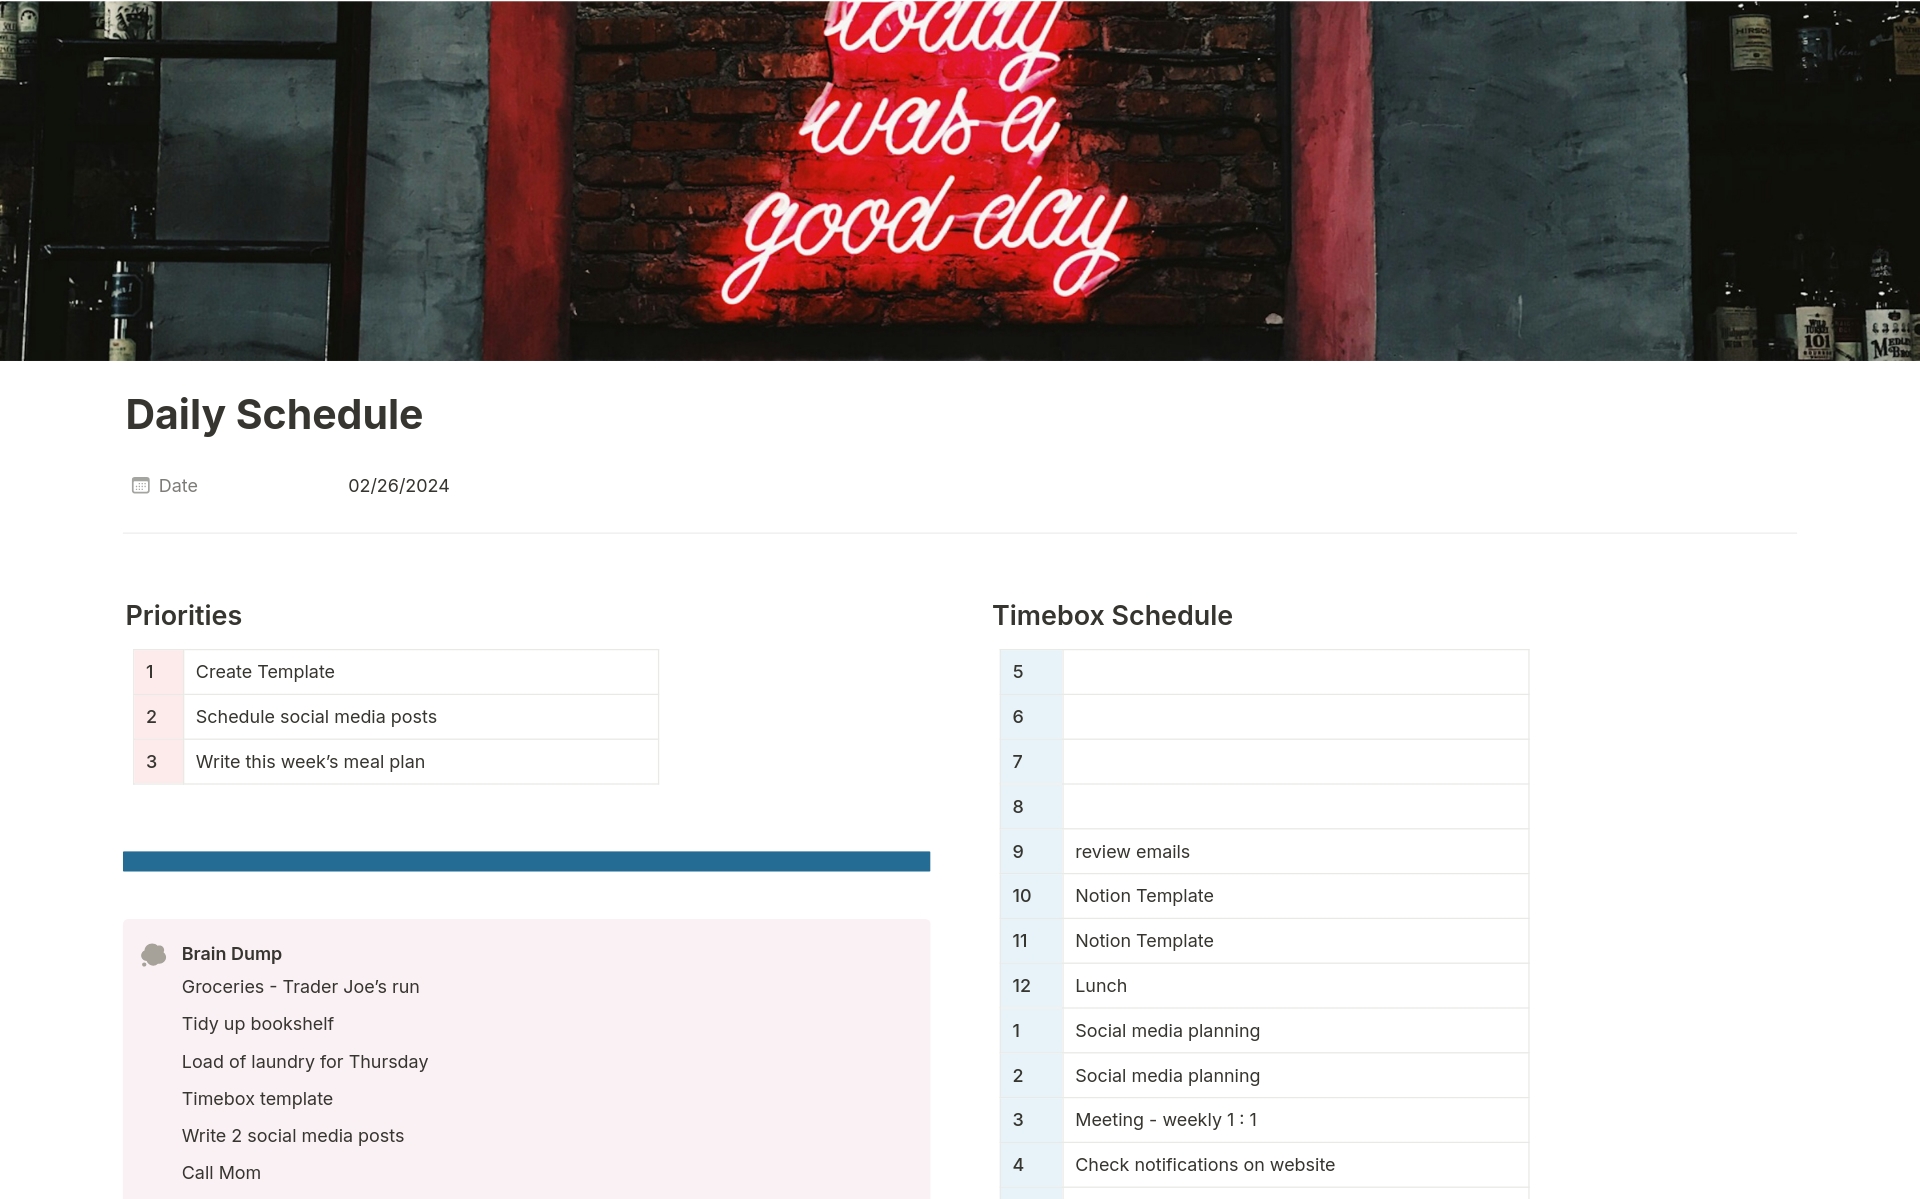 Timeboxing is the most effective time management technique. This no-frills, simple template will help you schedule each day, without distractions. So you can get busy doing instead of planning. 